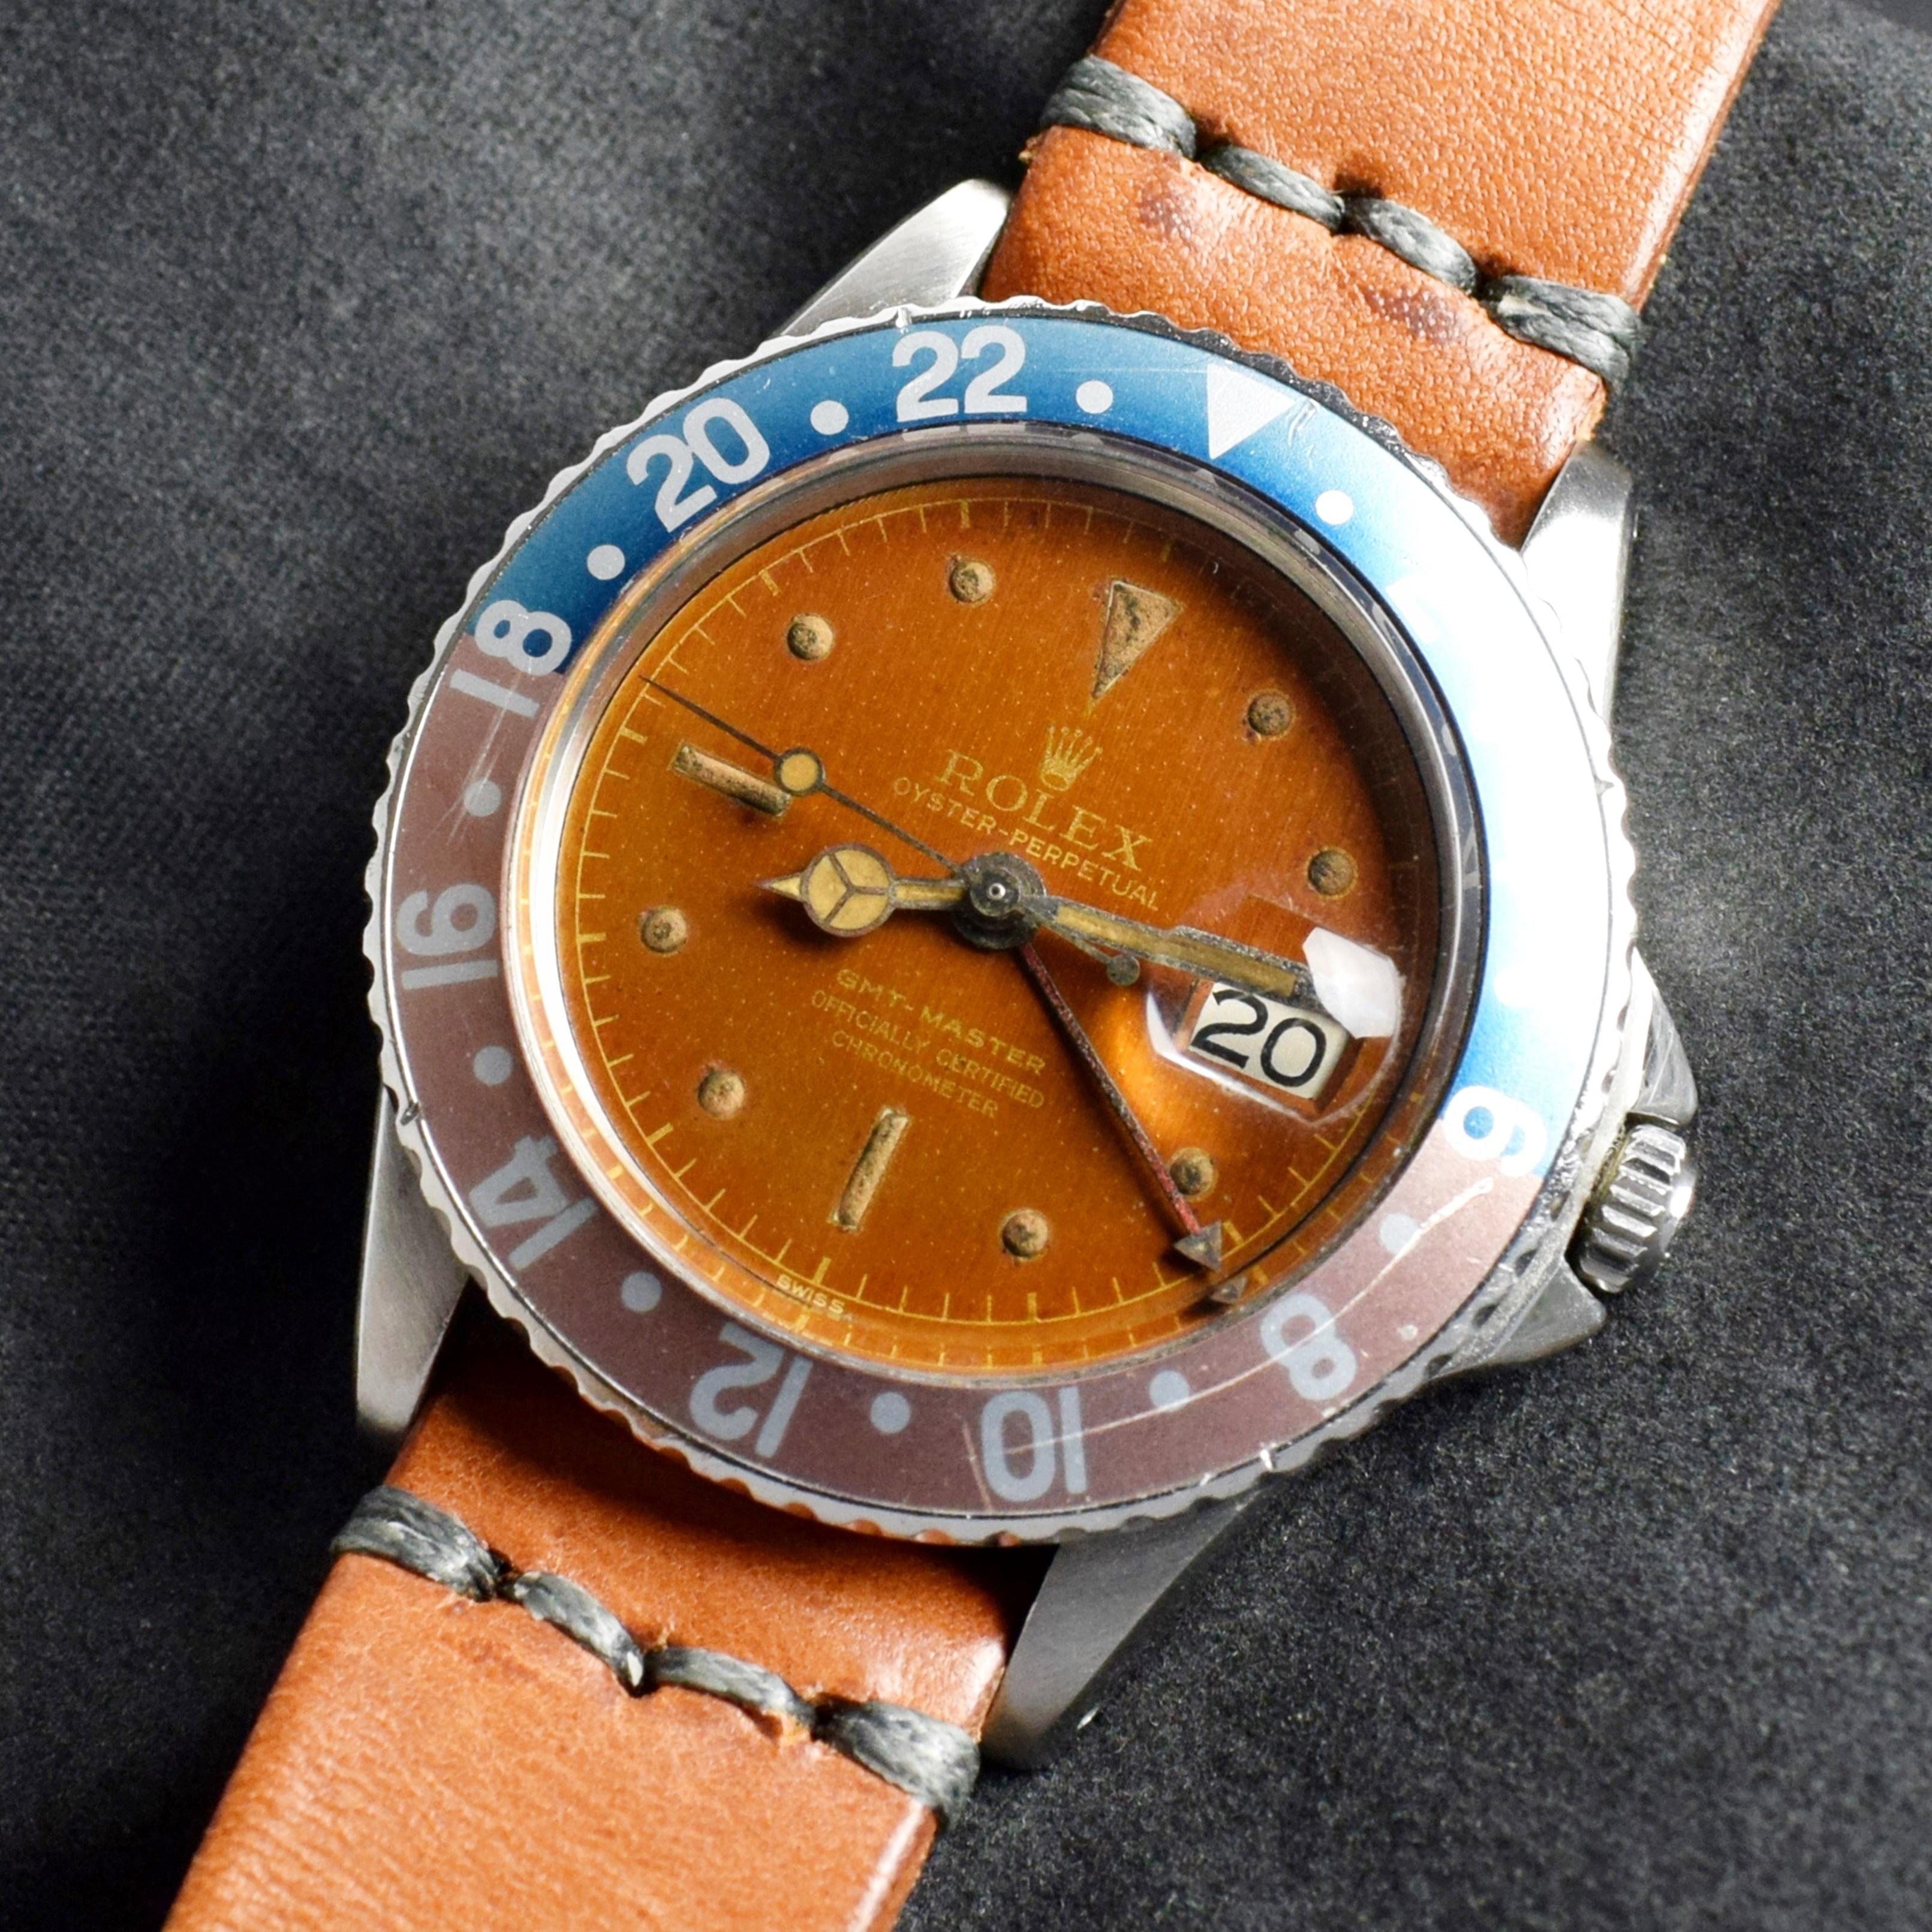 Brand: Vintage Rolex
Model: 1675
Year: 1960
Serial number: 50xxxx
Reference: OT1249

Case: Show sign of wear with slight polish from previous; inner case back stamped 1675 I 60; serial number is hard to capture in photo but it is still visible under